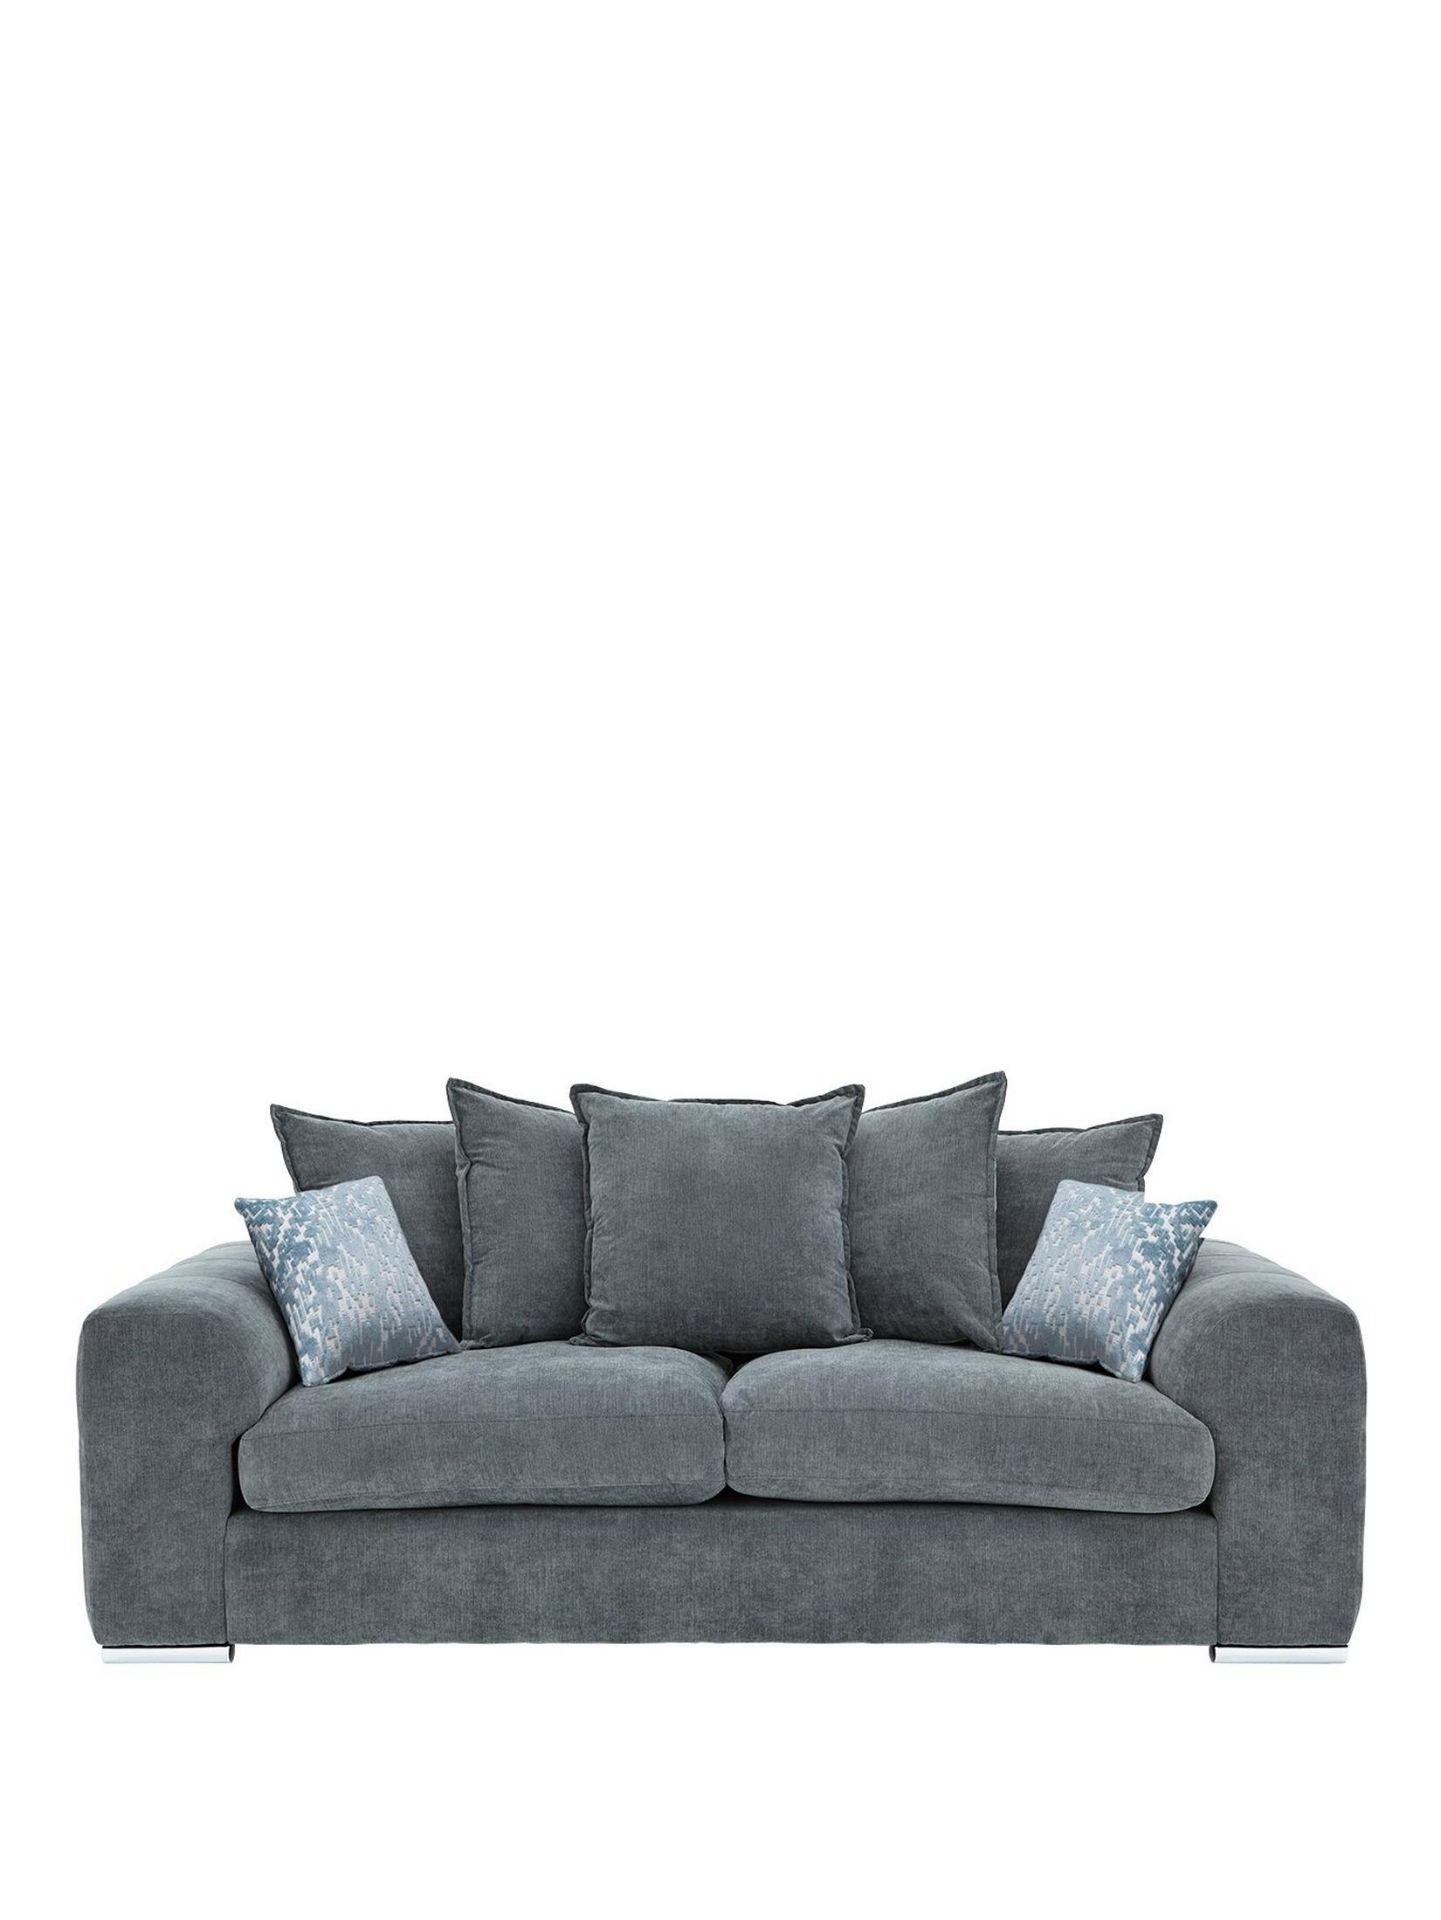 SOPHIA 3 SEATER SOFA. RPP £1,399.00. Dimensions: Height 89, Width 221, Depth 96 cm (approx.) - Image 2 of 2